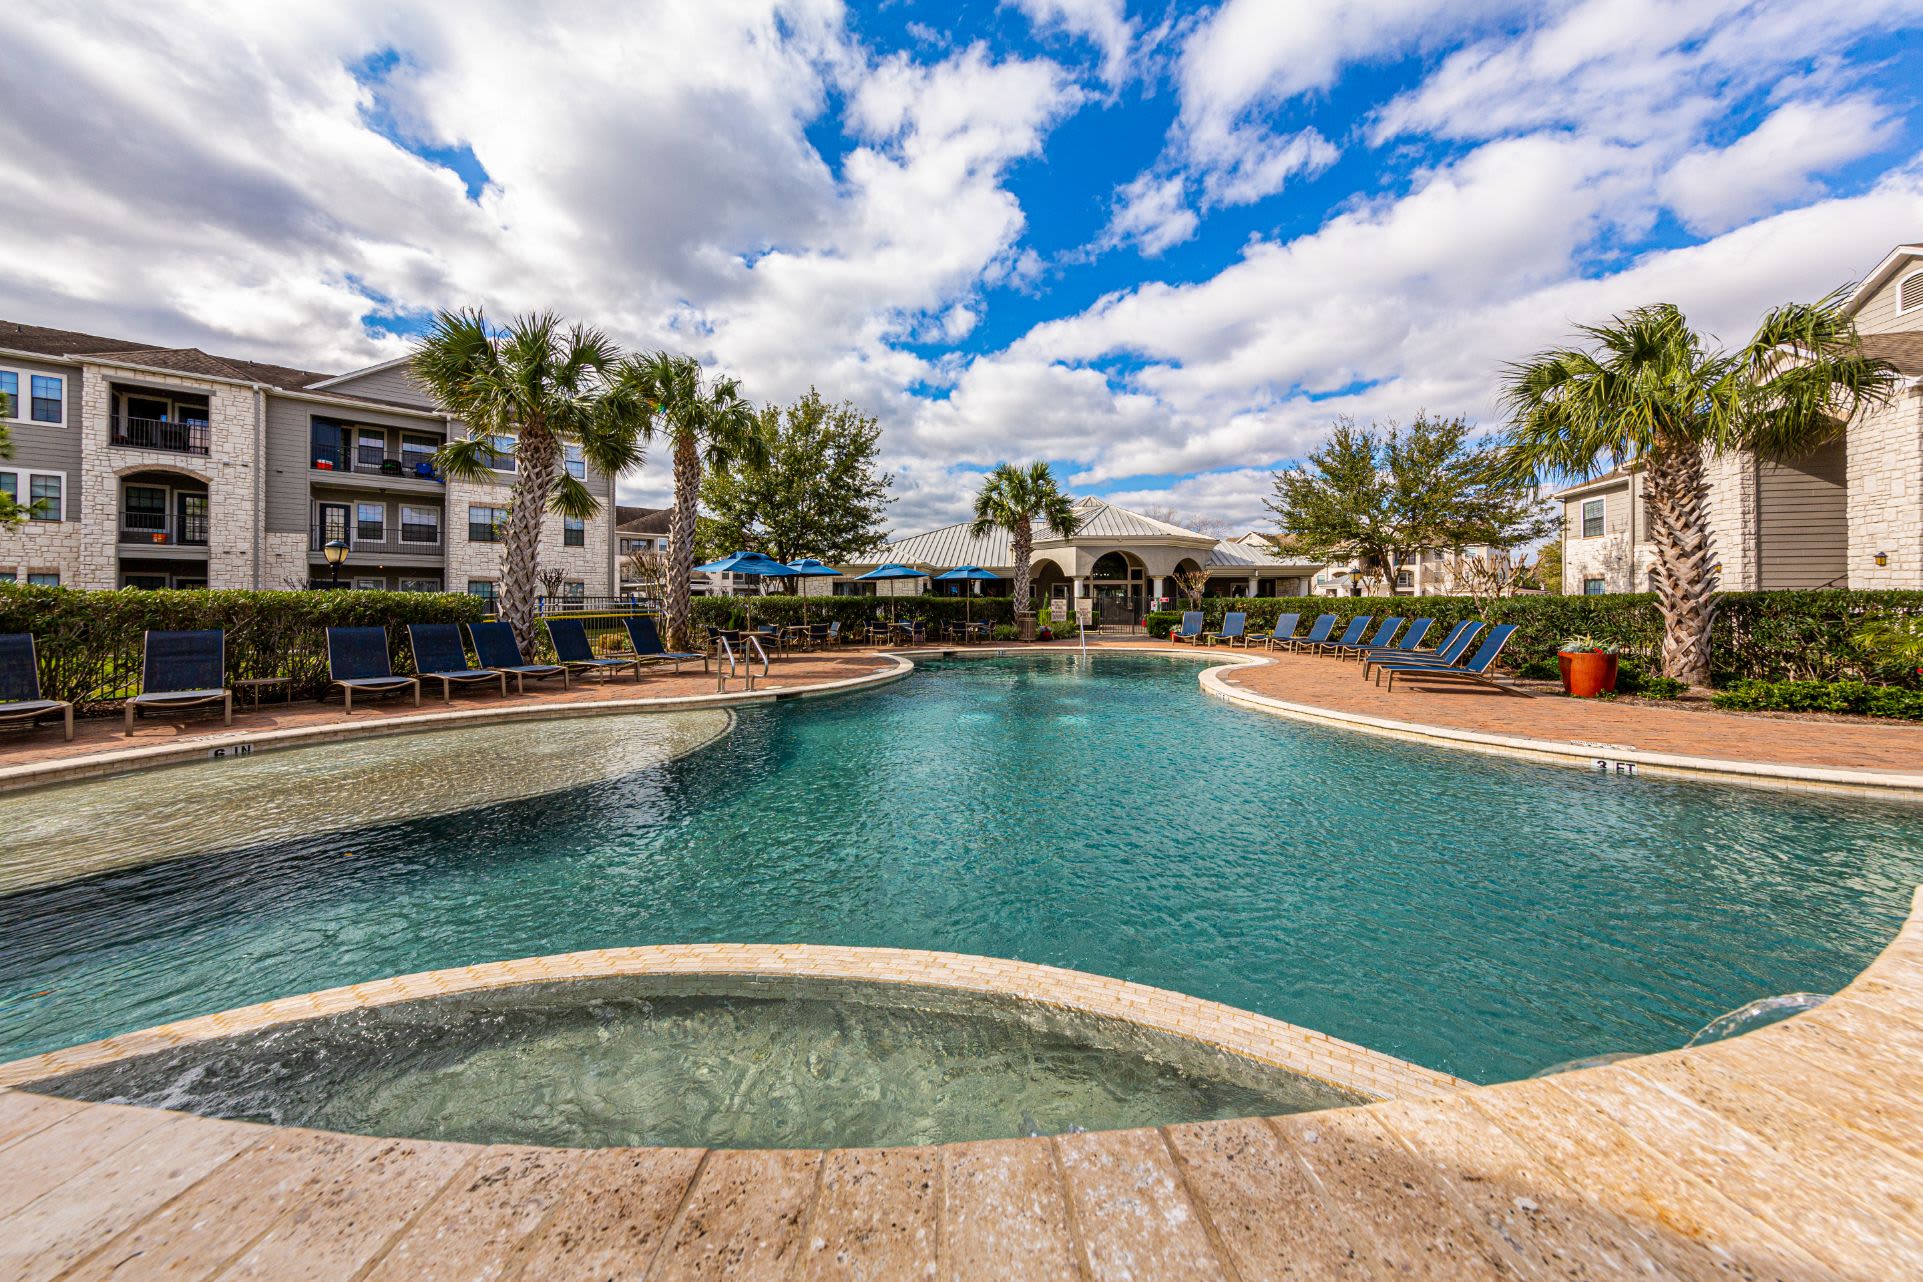 Apply to live at Marquis Grand Lakes in Richmond, Texas